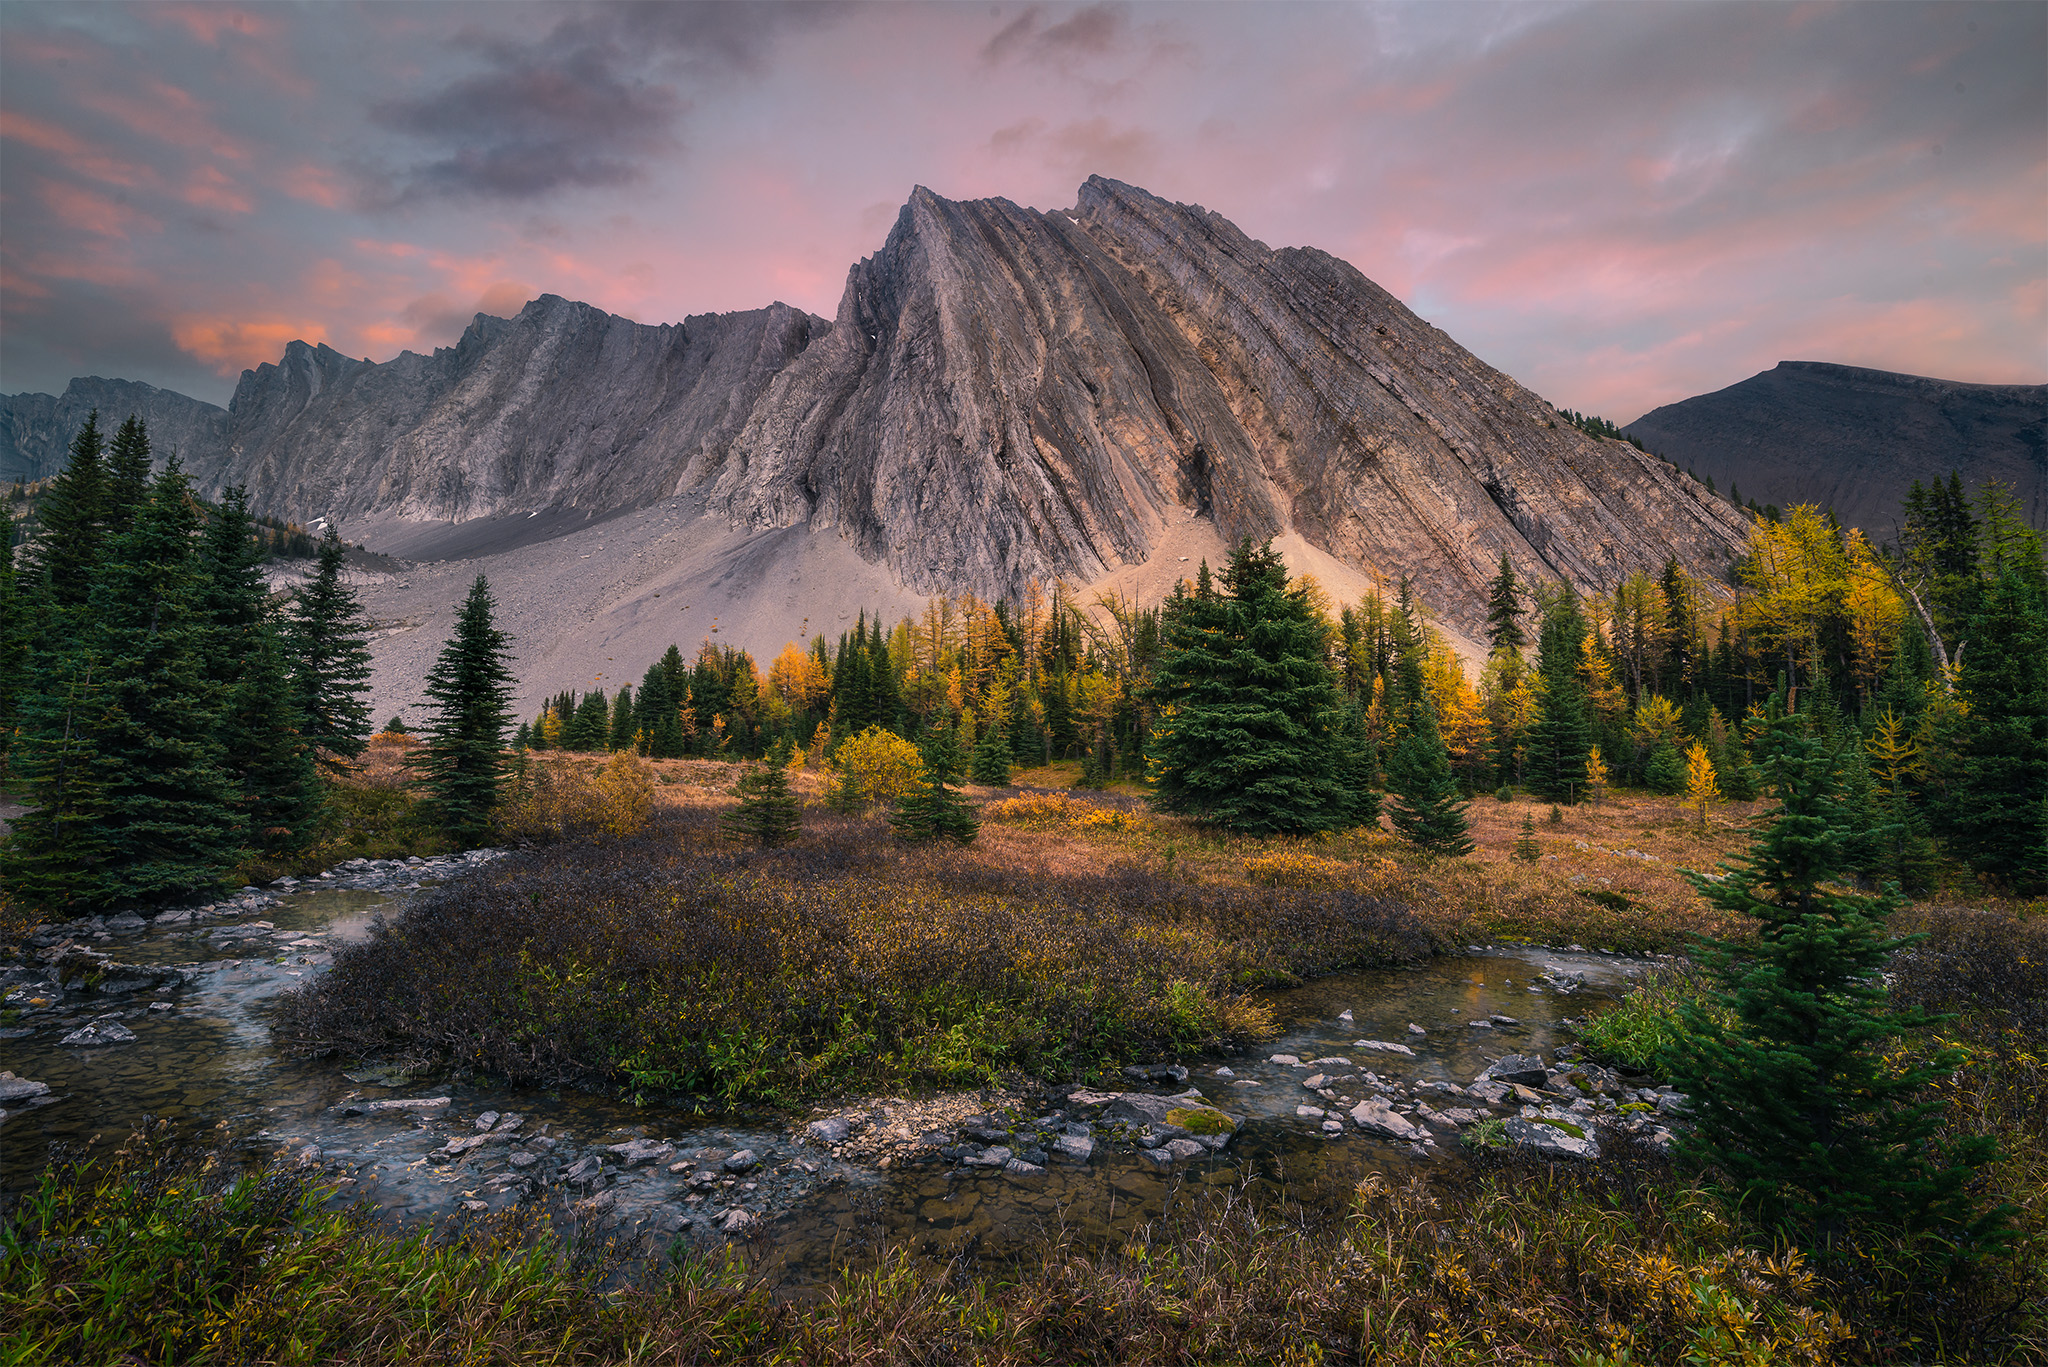 A landscape photograph captured at Chester Lake in the Canadian Rockies at sunset